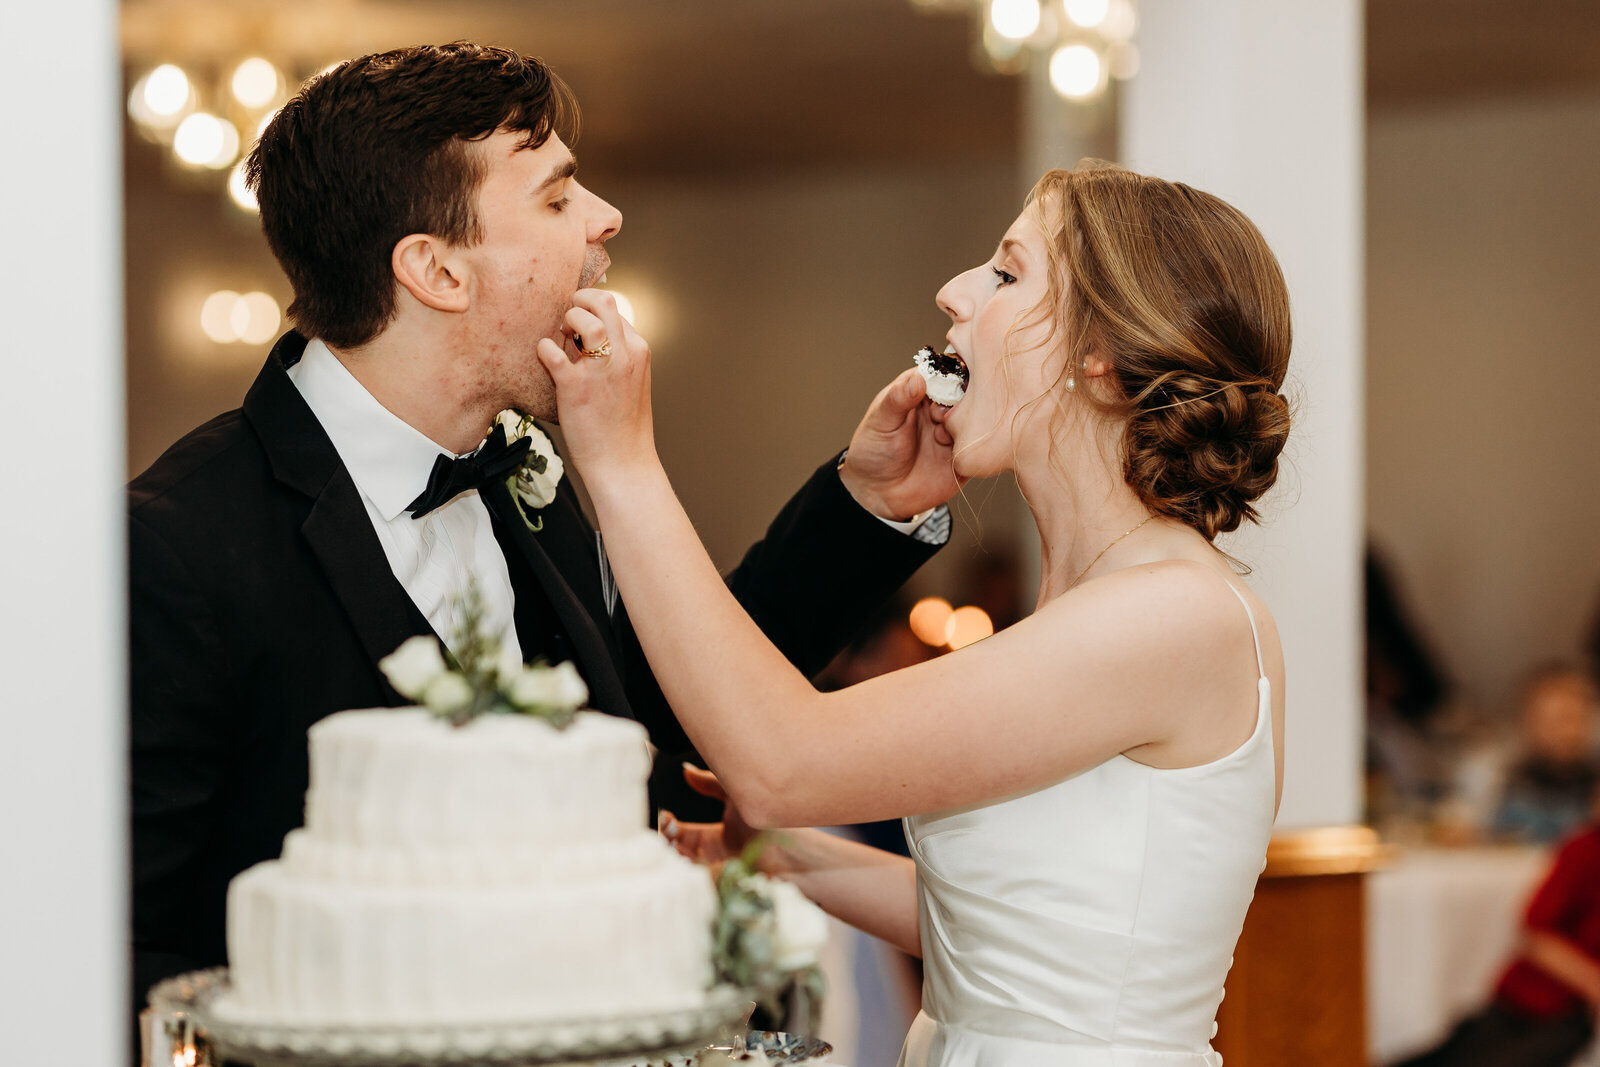 Newly wed couple feed each other  a piece of cake